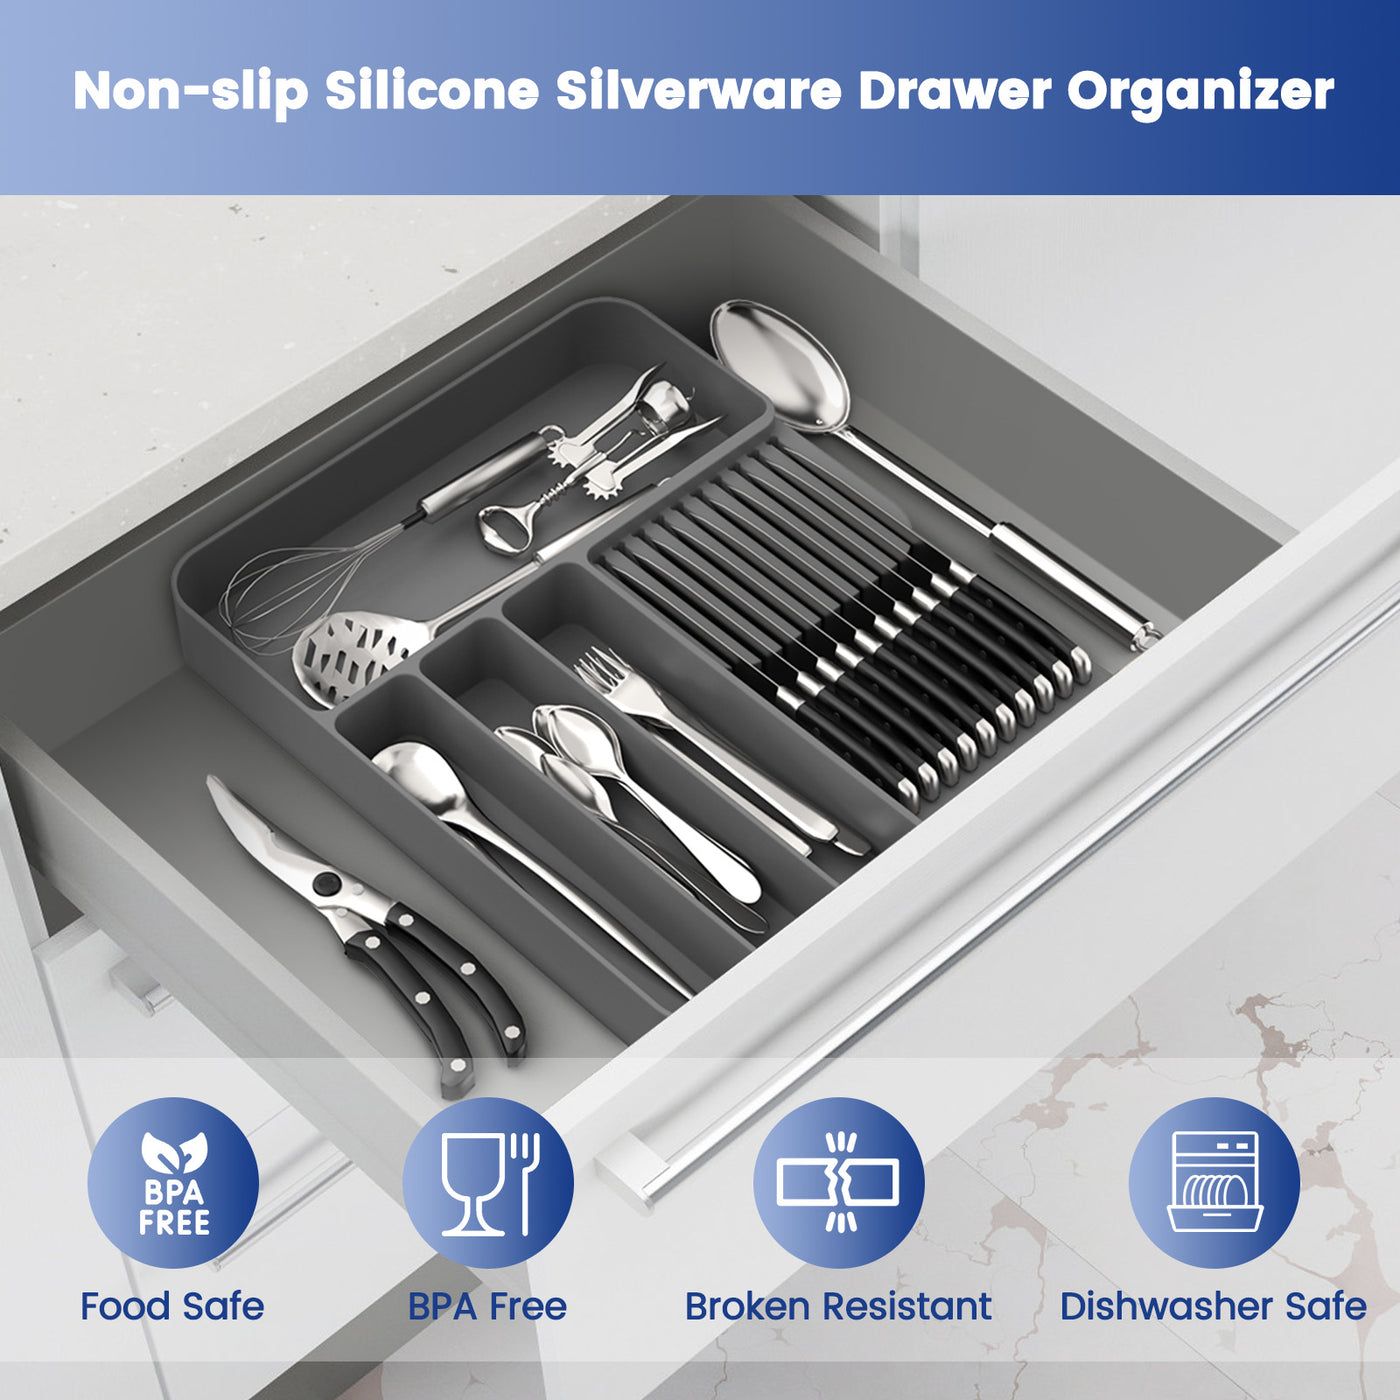 OUTXE Silicone Silverware Drawer Organizer, Non-Slip Utensil Organizer for Kitchen Drawers, Cutlery Tray with Extra Knife Block, 4 Compartments Flatware Organizer for Spoon and Fork, Grey